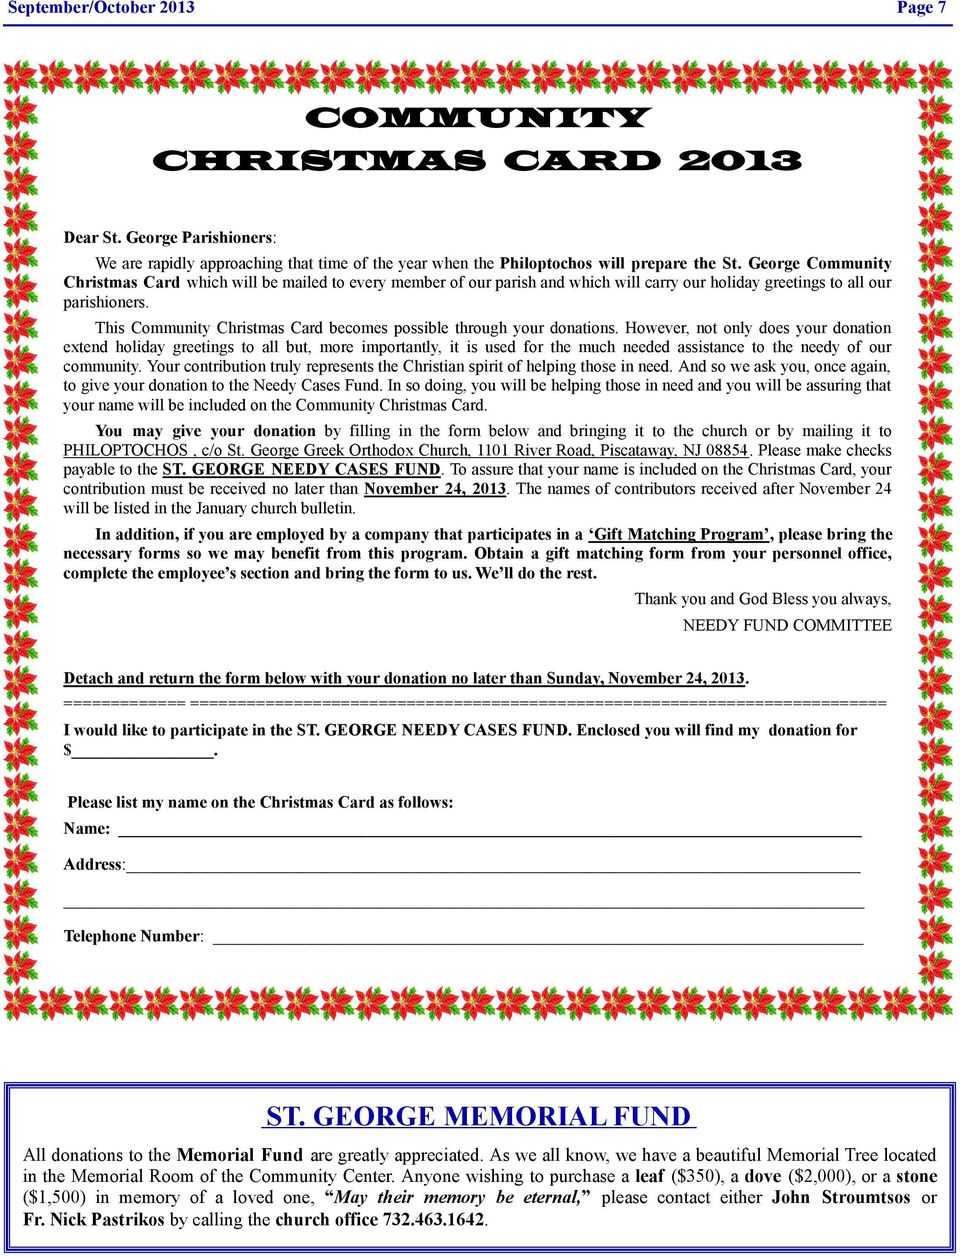 This Community Christmas Card becomes possible through your donations.